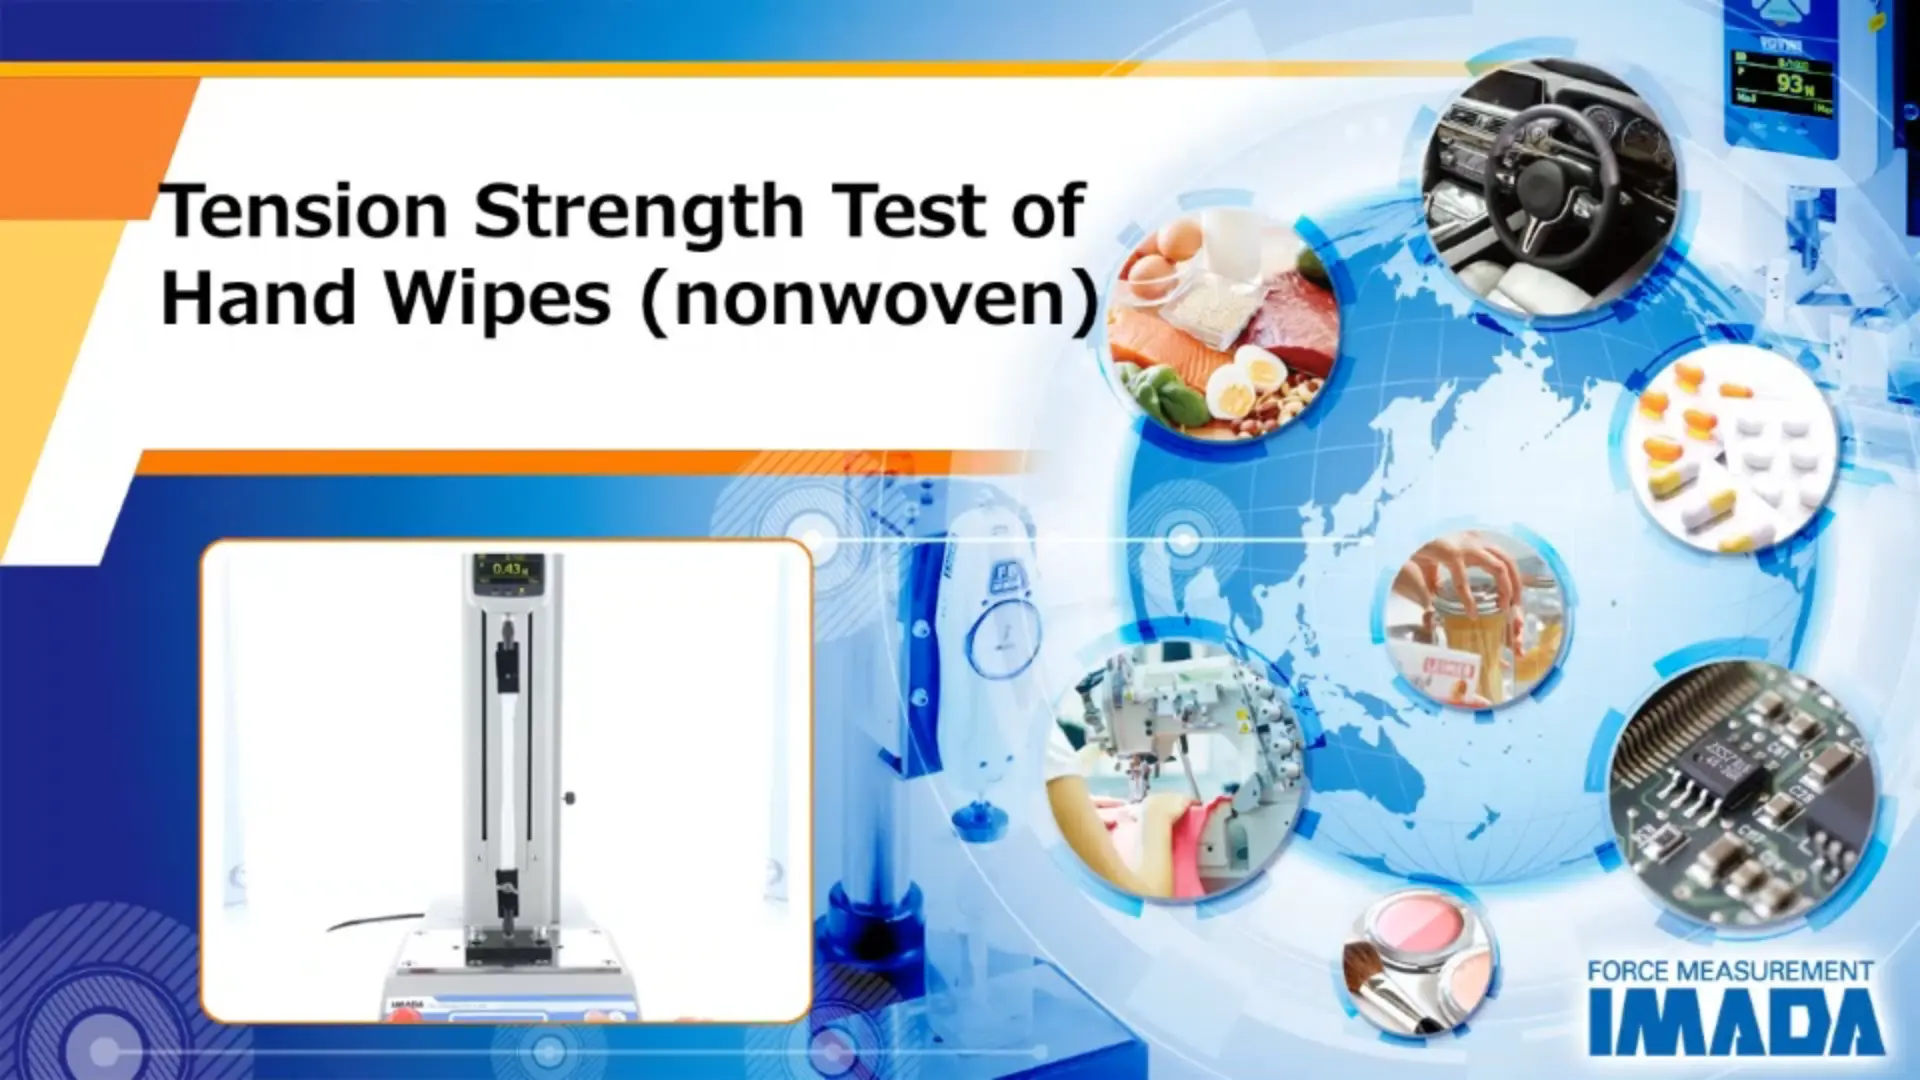 Tension strength test of hand wipes (non-woven)